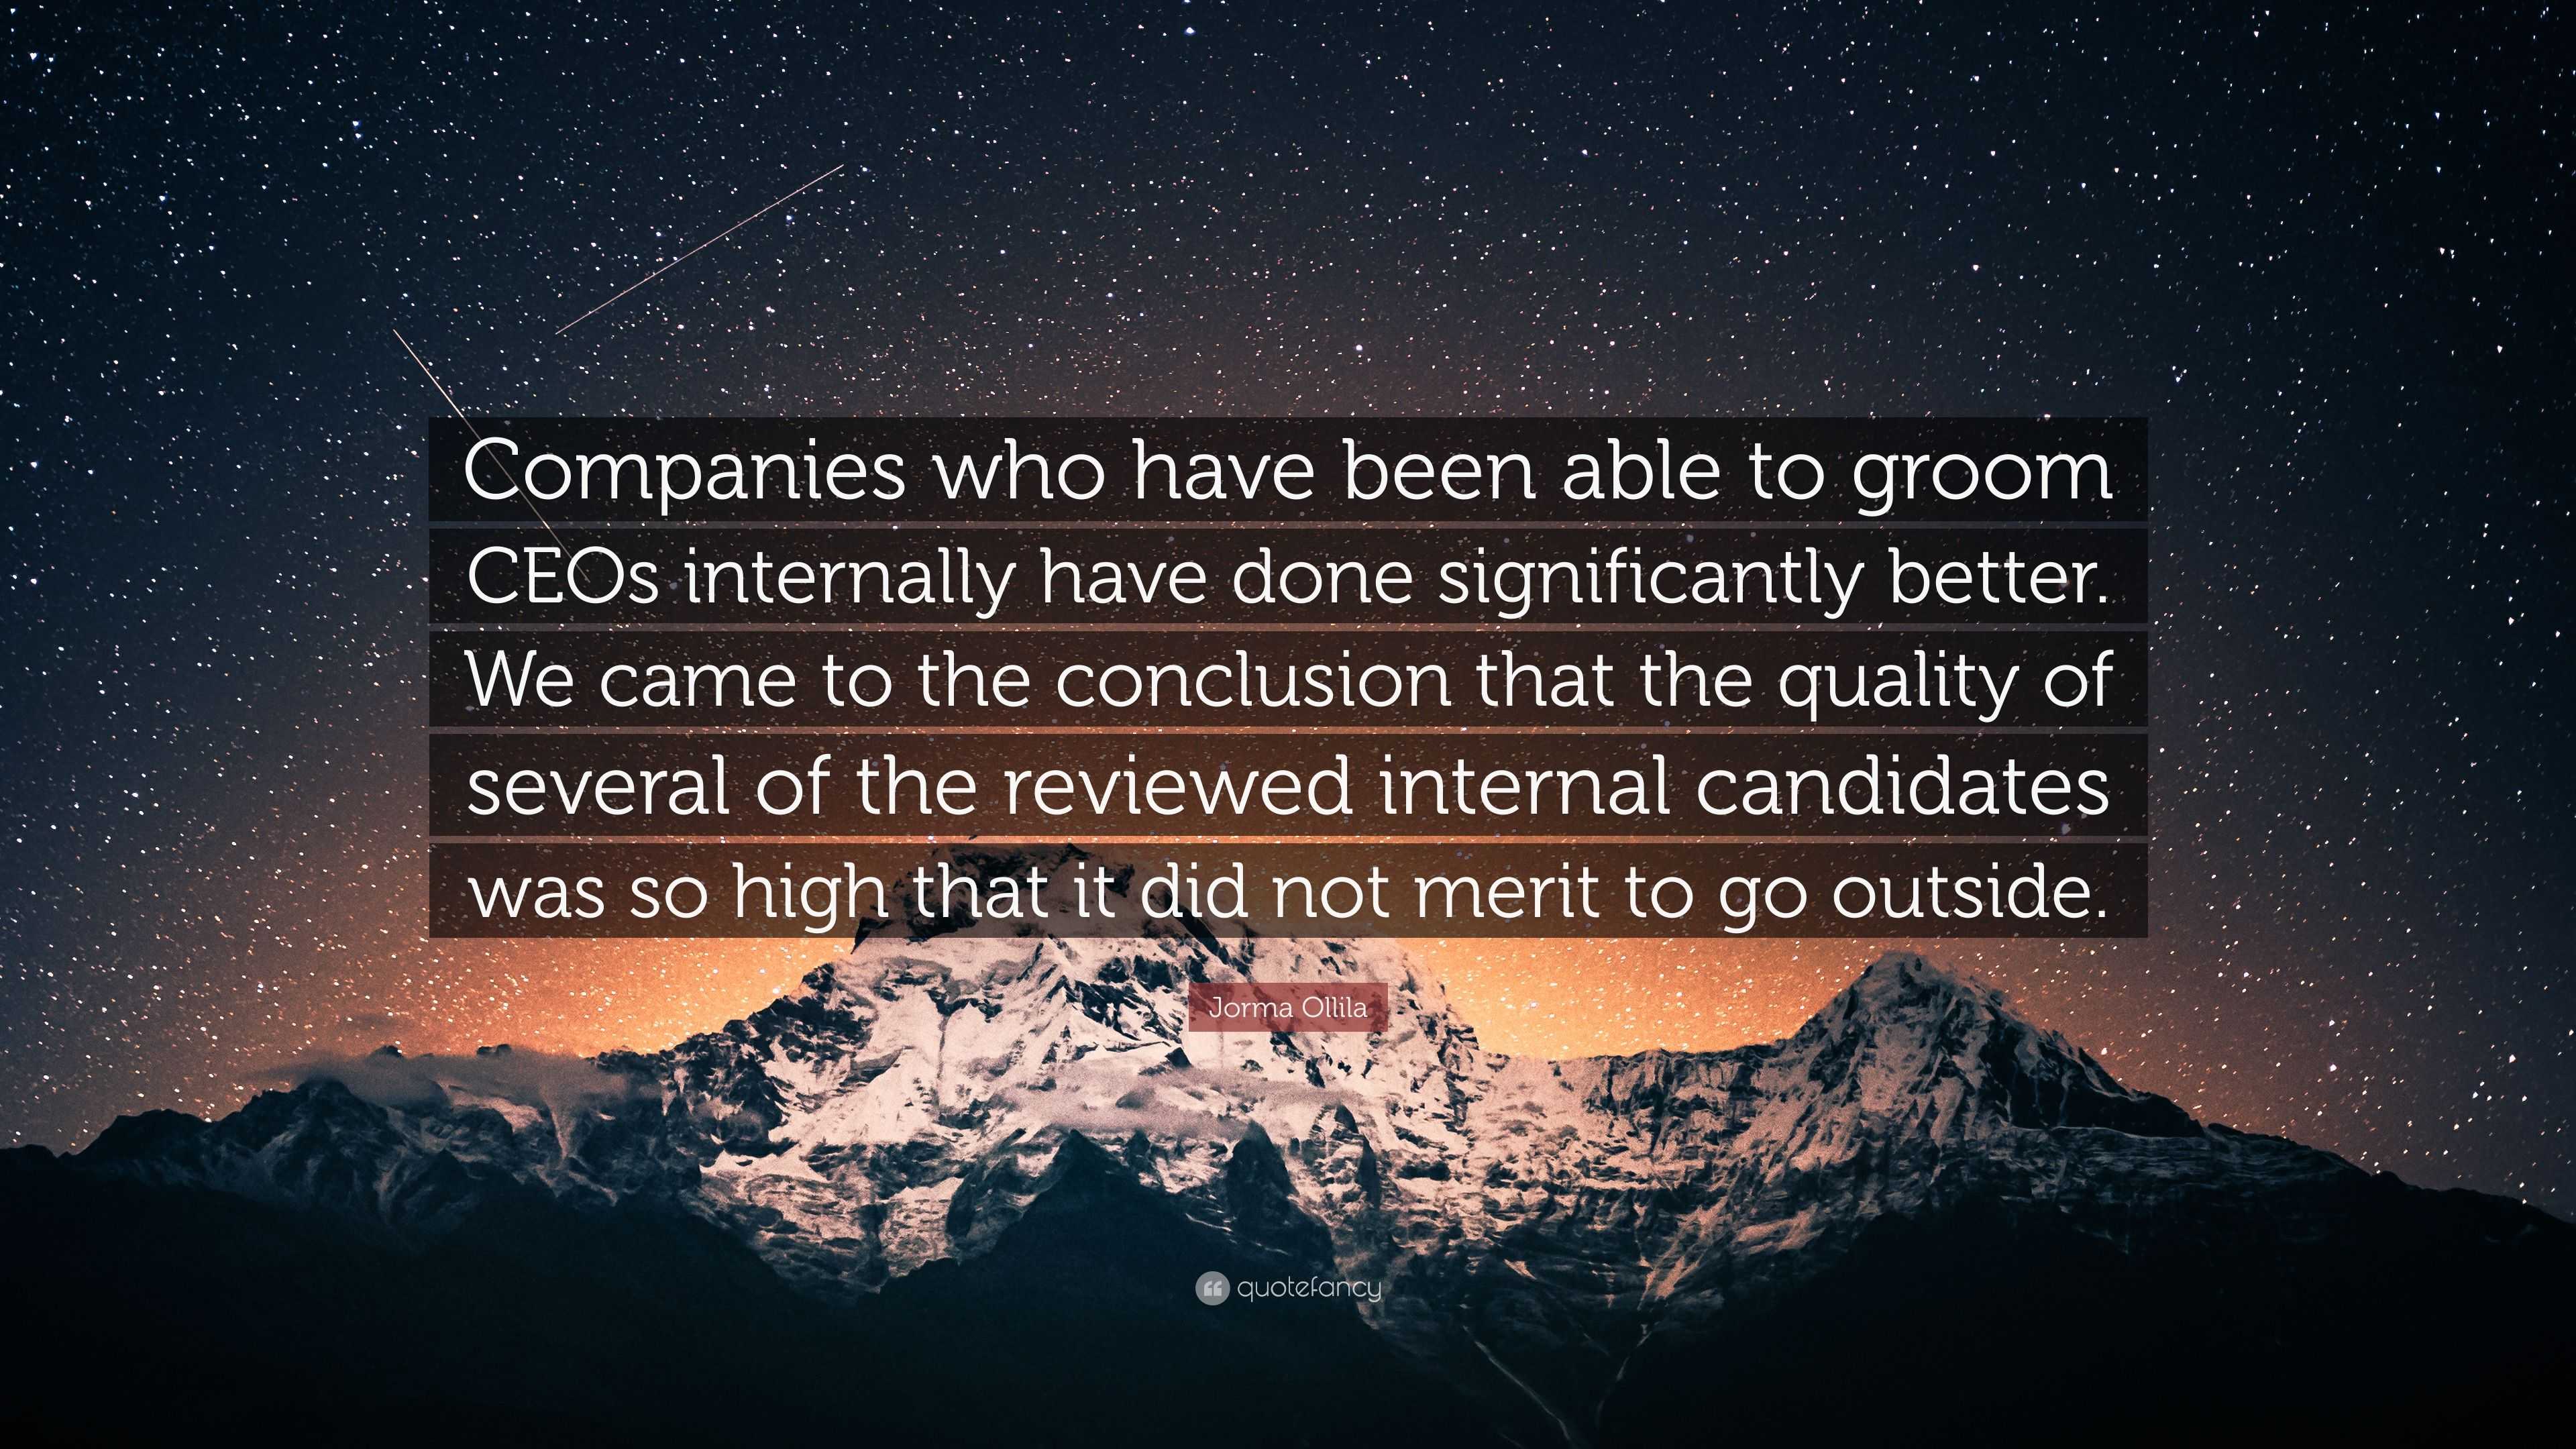 Jorma Ollila Quote: “Companies who have been able to groom CEOs internally  have done significantly better. We came to the conclusion that the...”